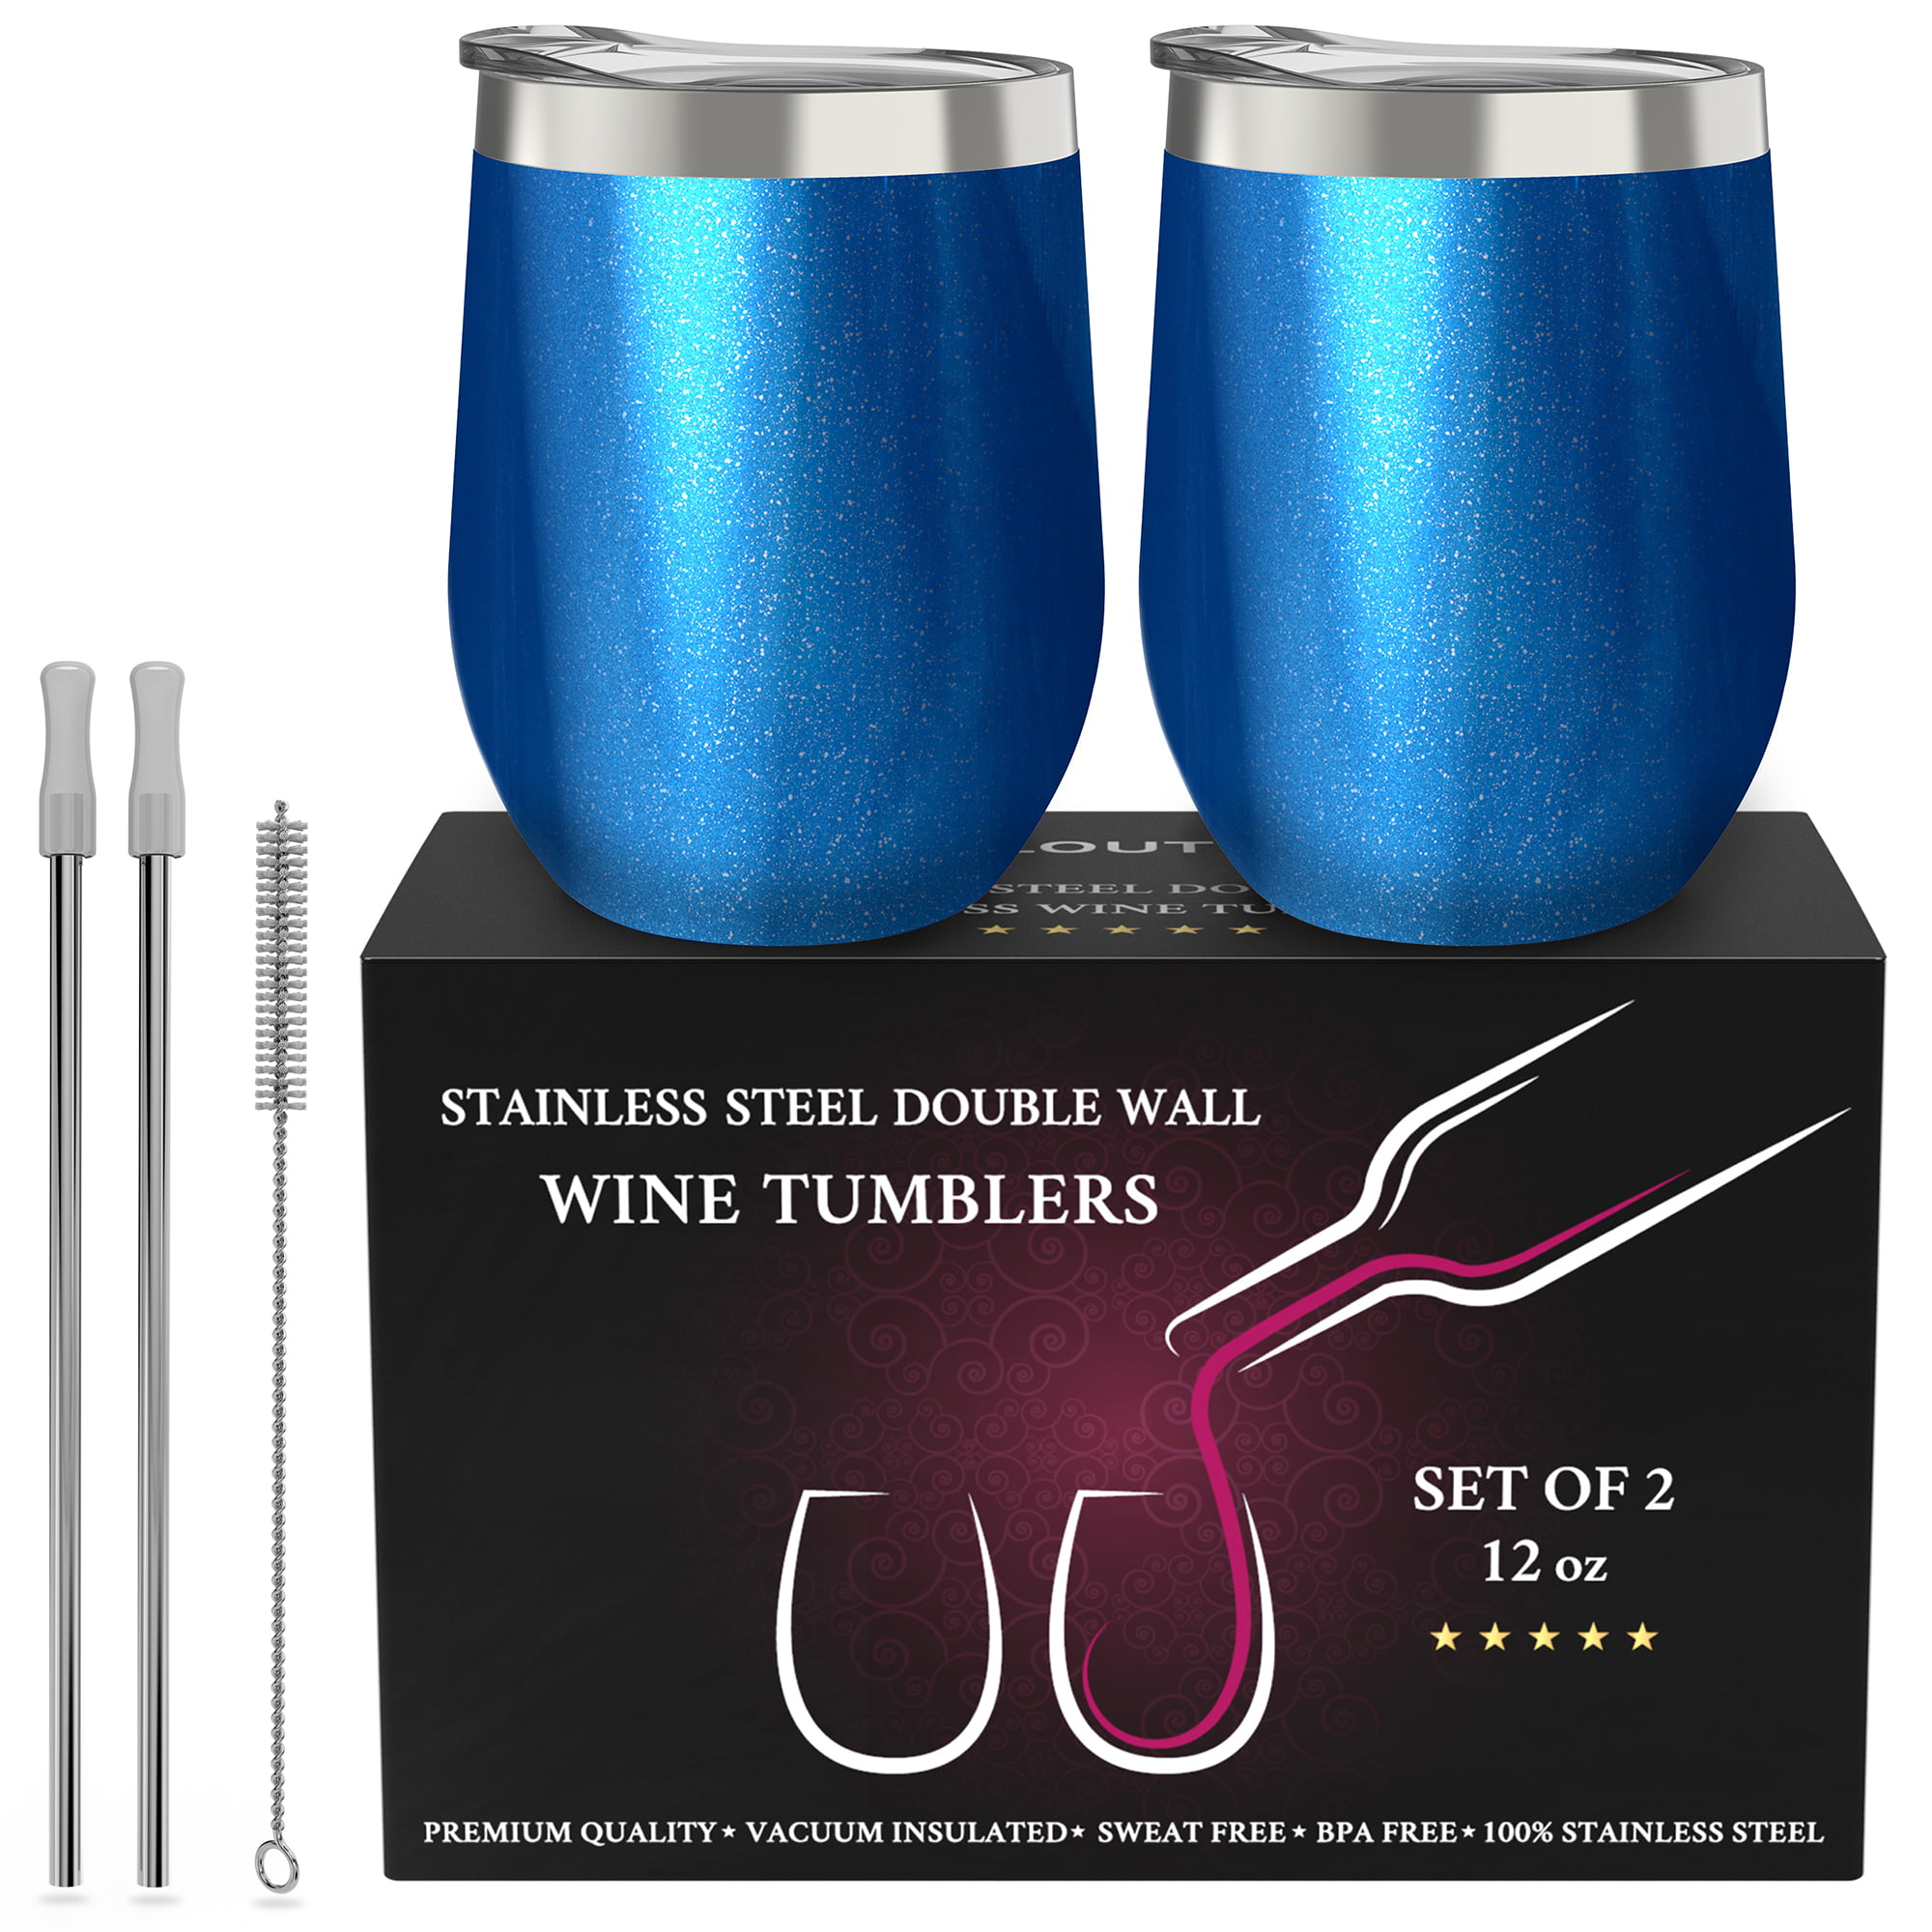 CHILLOUT LIFE Stainless Steel Wine Tumblers 2 Pack 12 oz - Double Wall  Vacuum Insulated Wine Cups wi…See more CHILLOUT LIFE Stainless Steel Wine